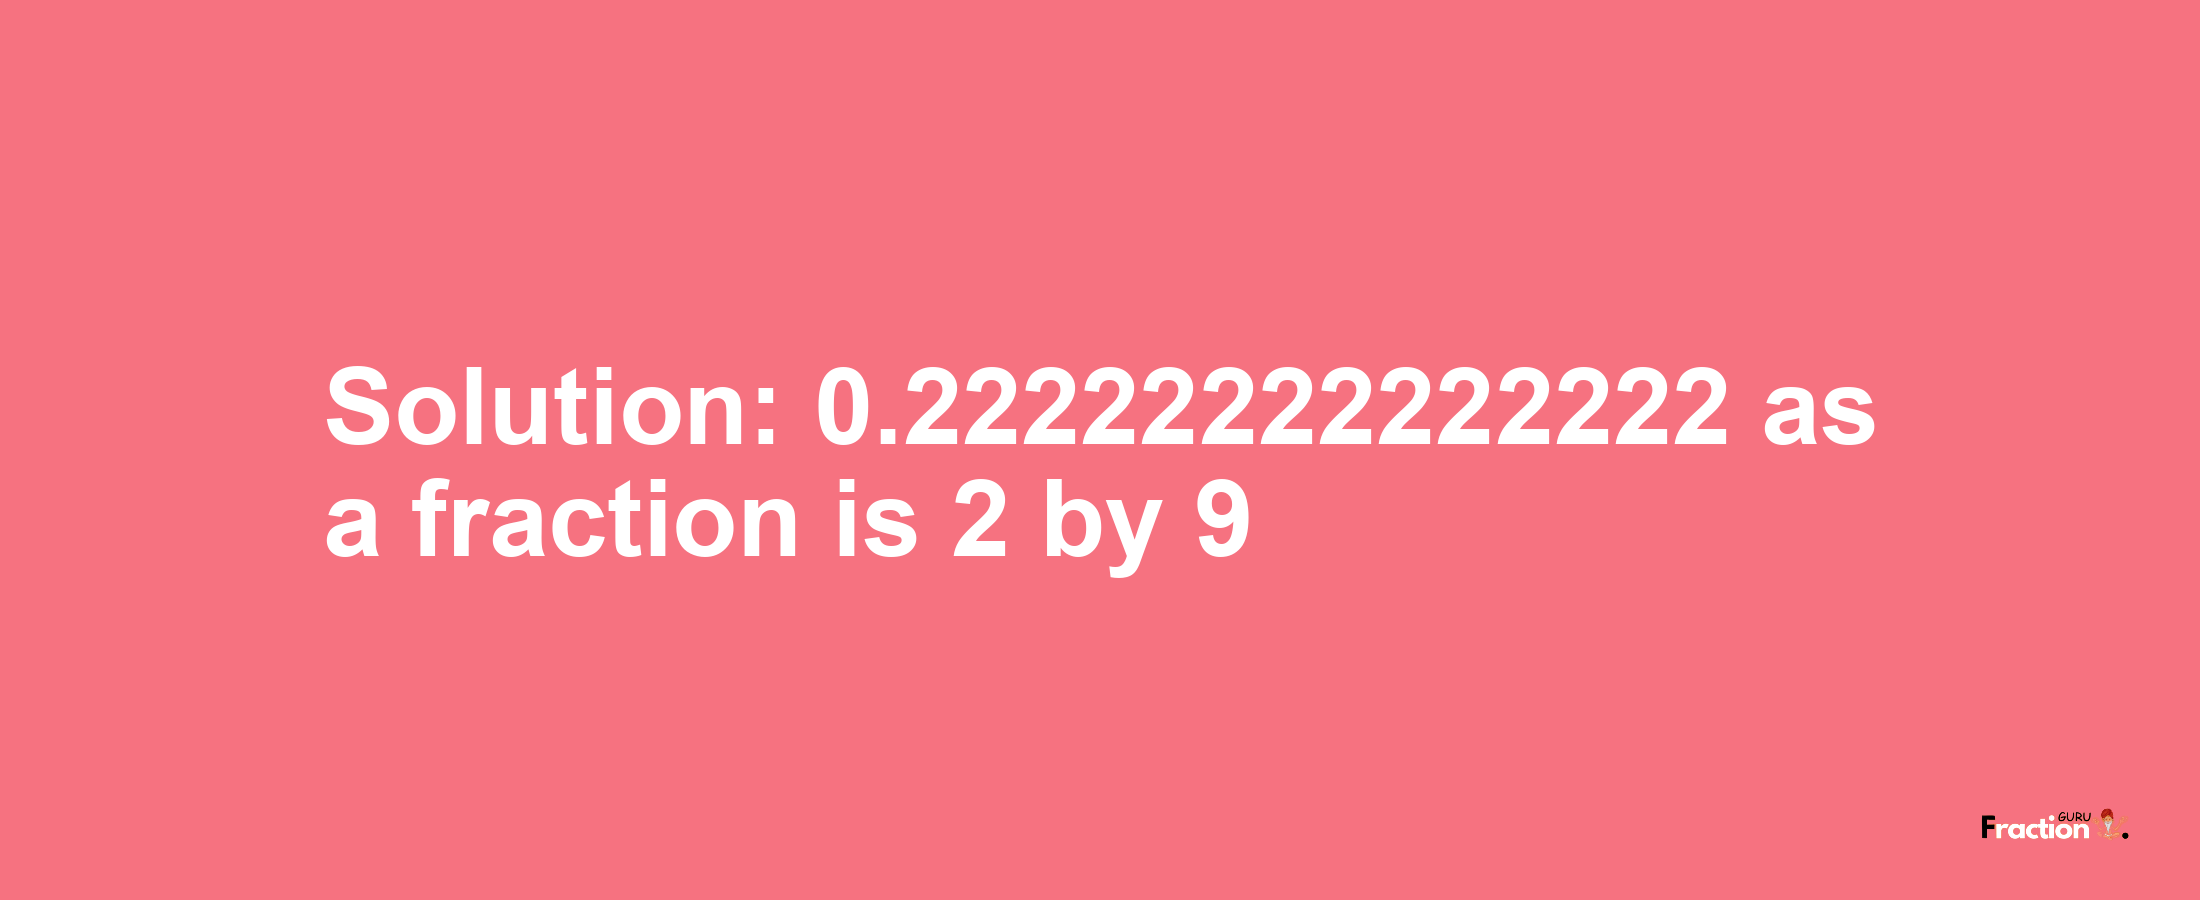 Solution:0.22222222222222 as a fraction is 2/9